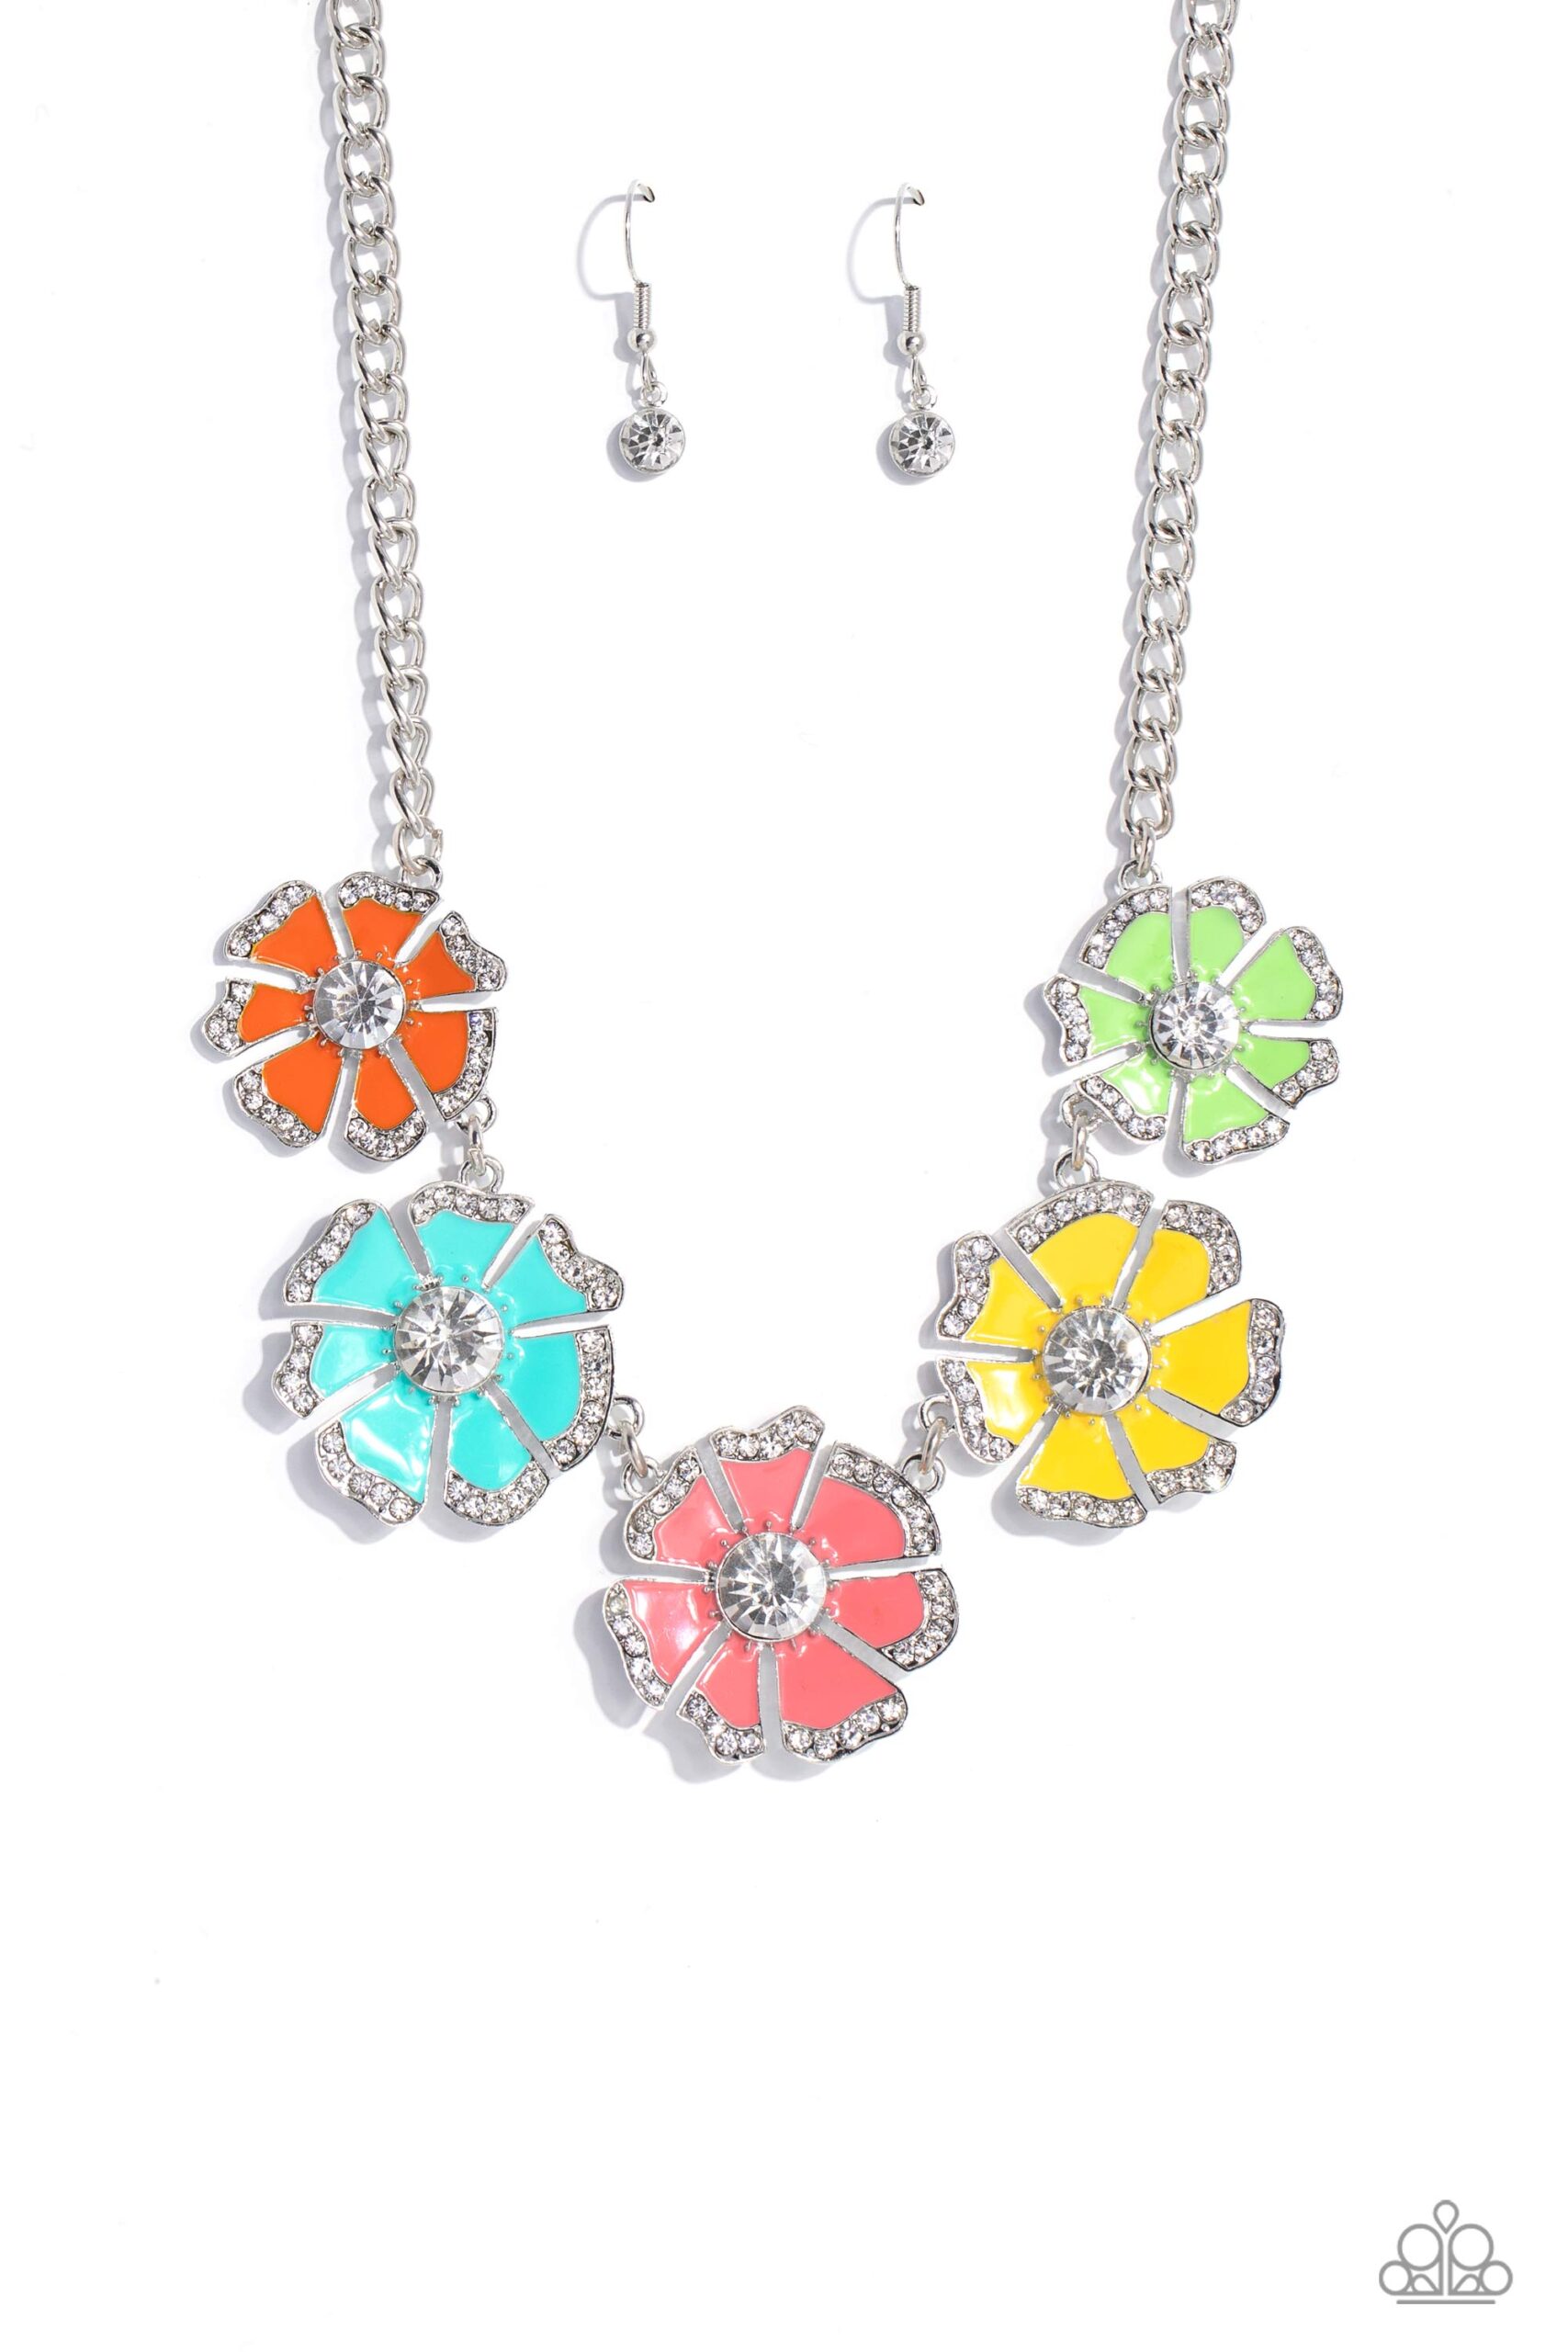 Necklace - Playful Posies - Multi